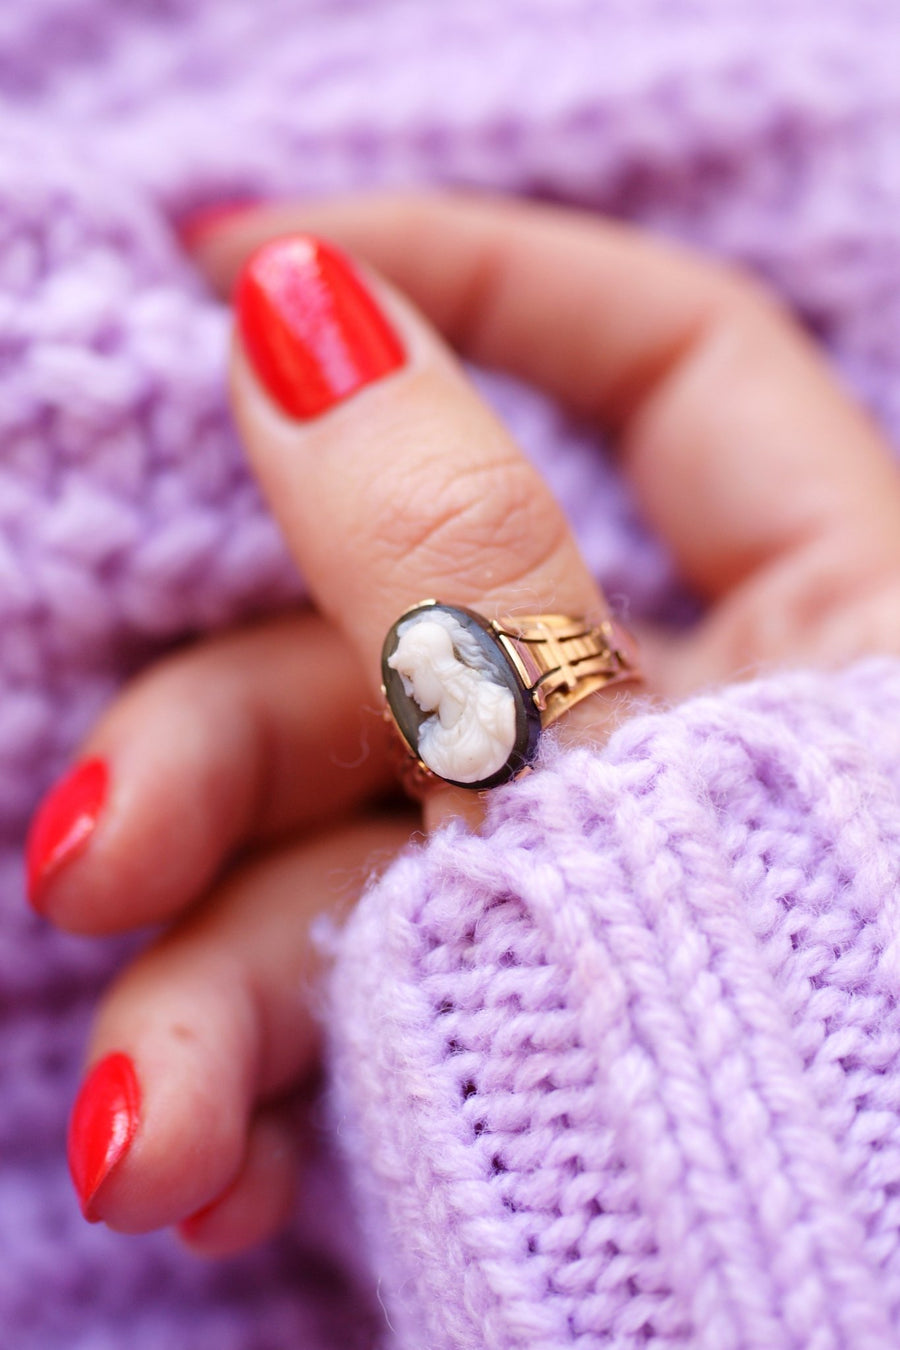 Antique rose gold and cameo agate ring, signed Louis Hanot - Galerie Pénélope